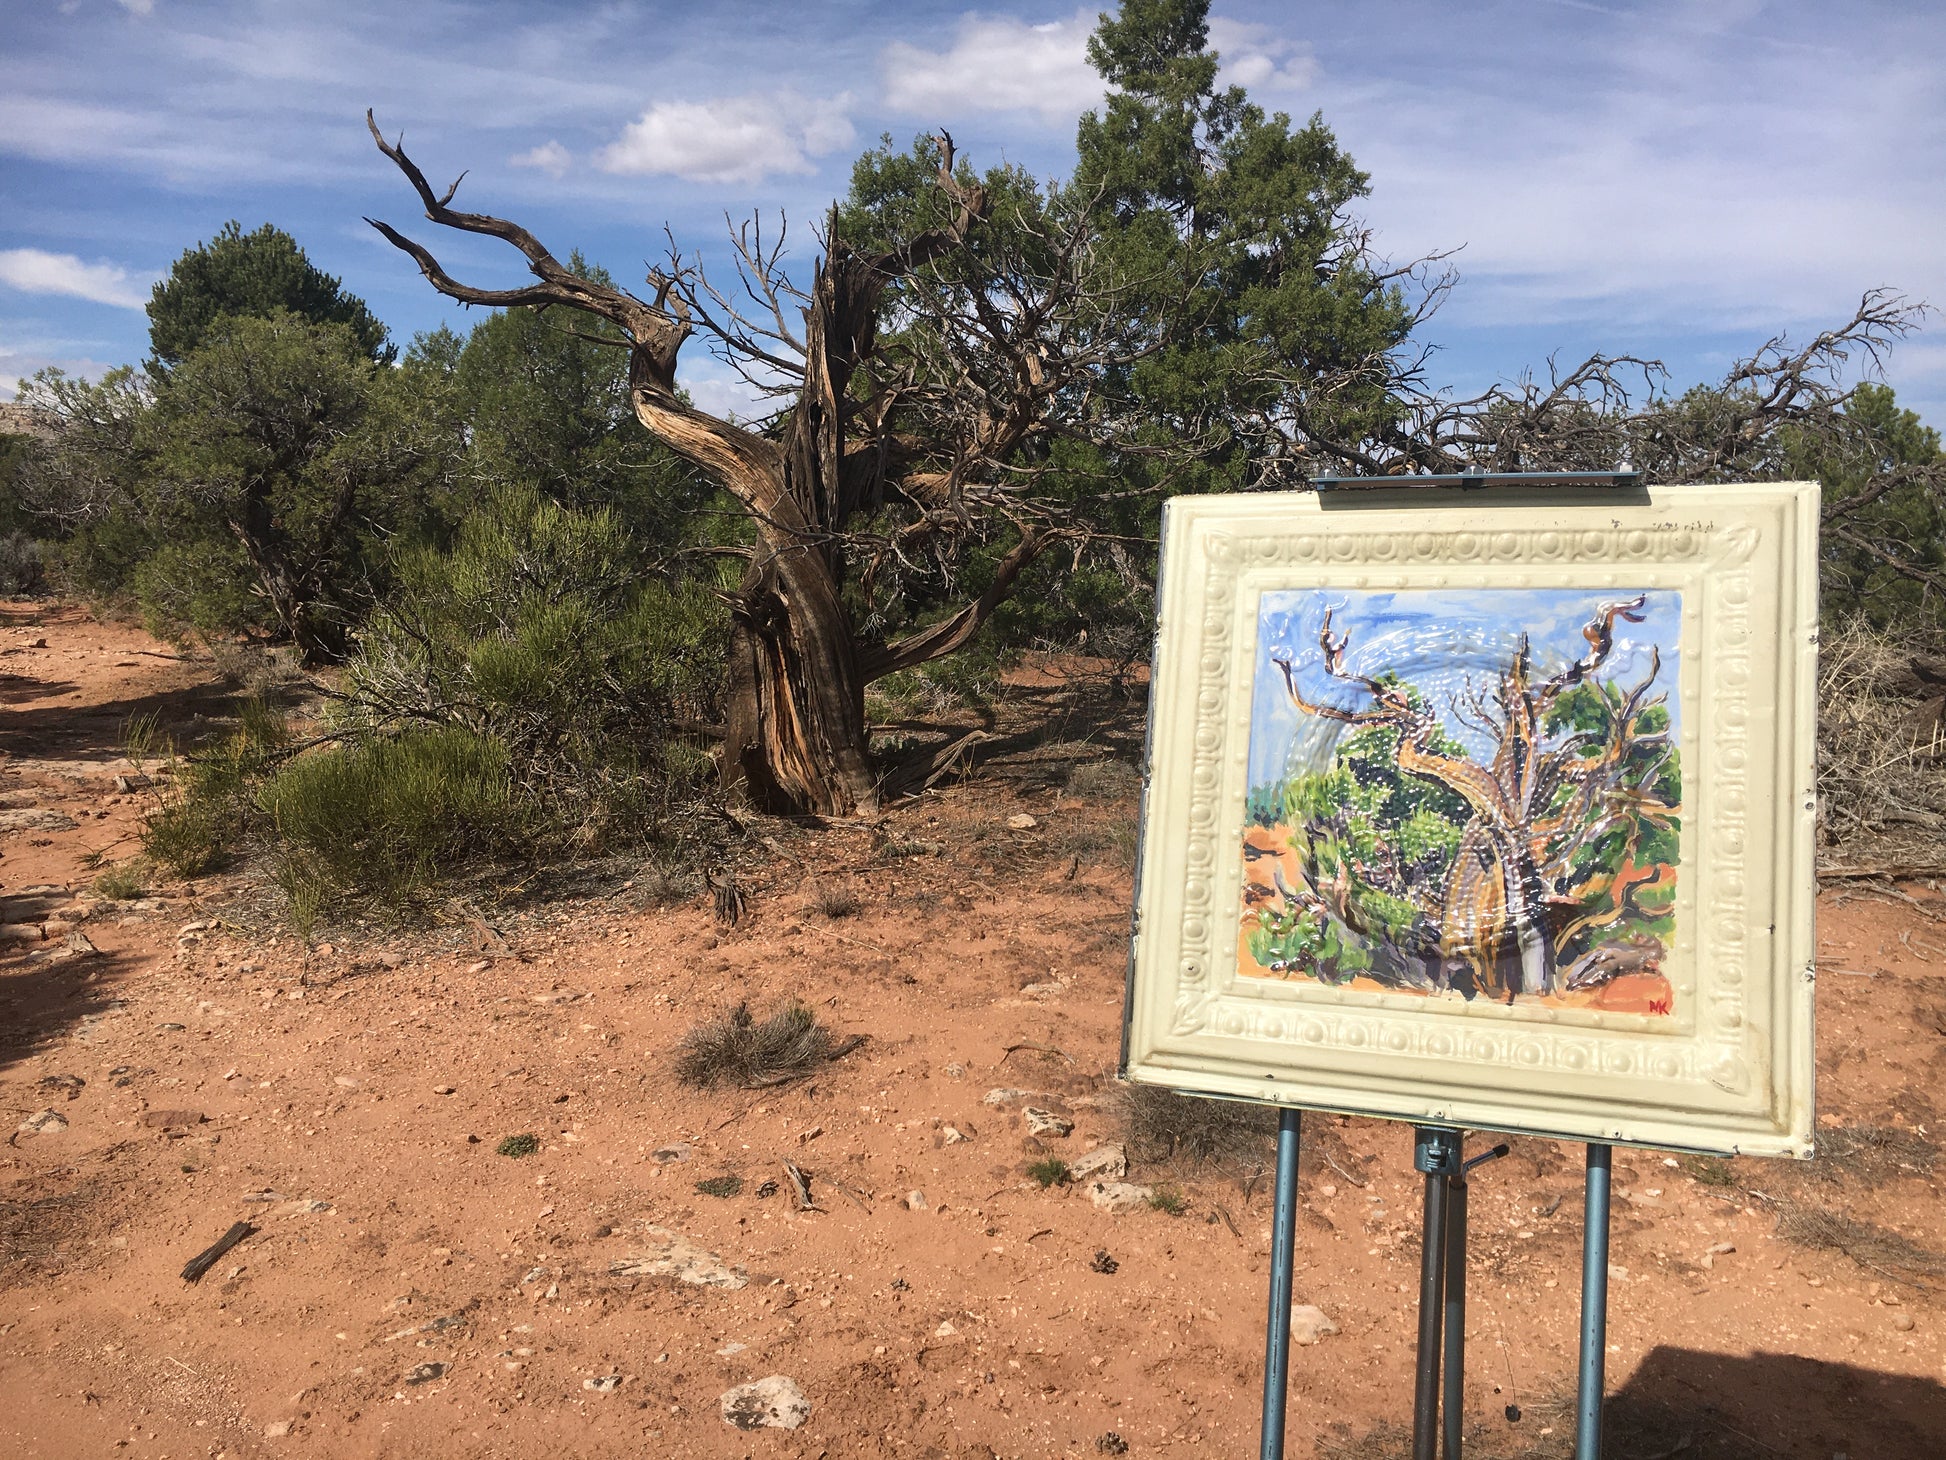 A view of the original juniper tree along with the Artist's rendition of her art. The original location the plein air paintings was created.